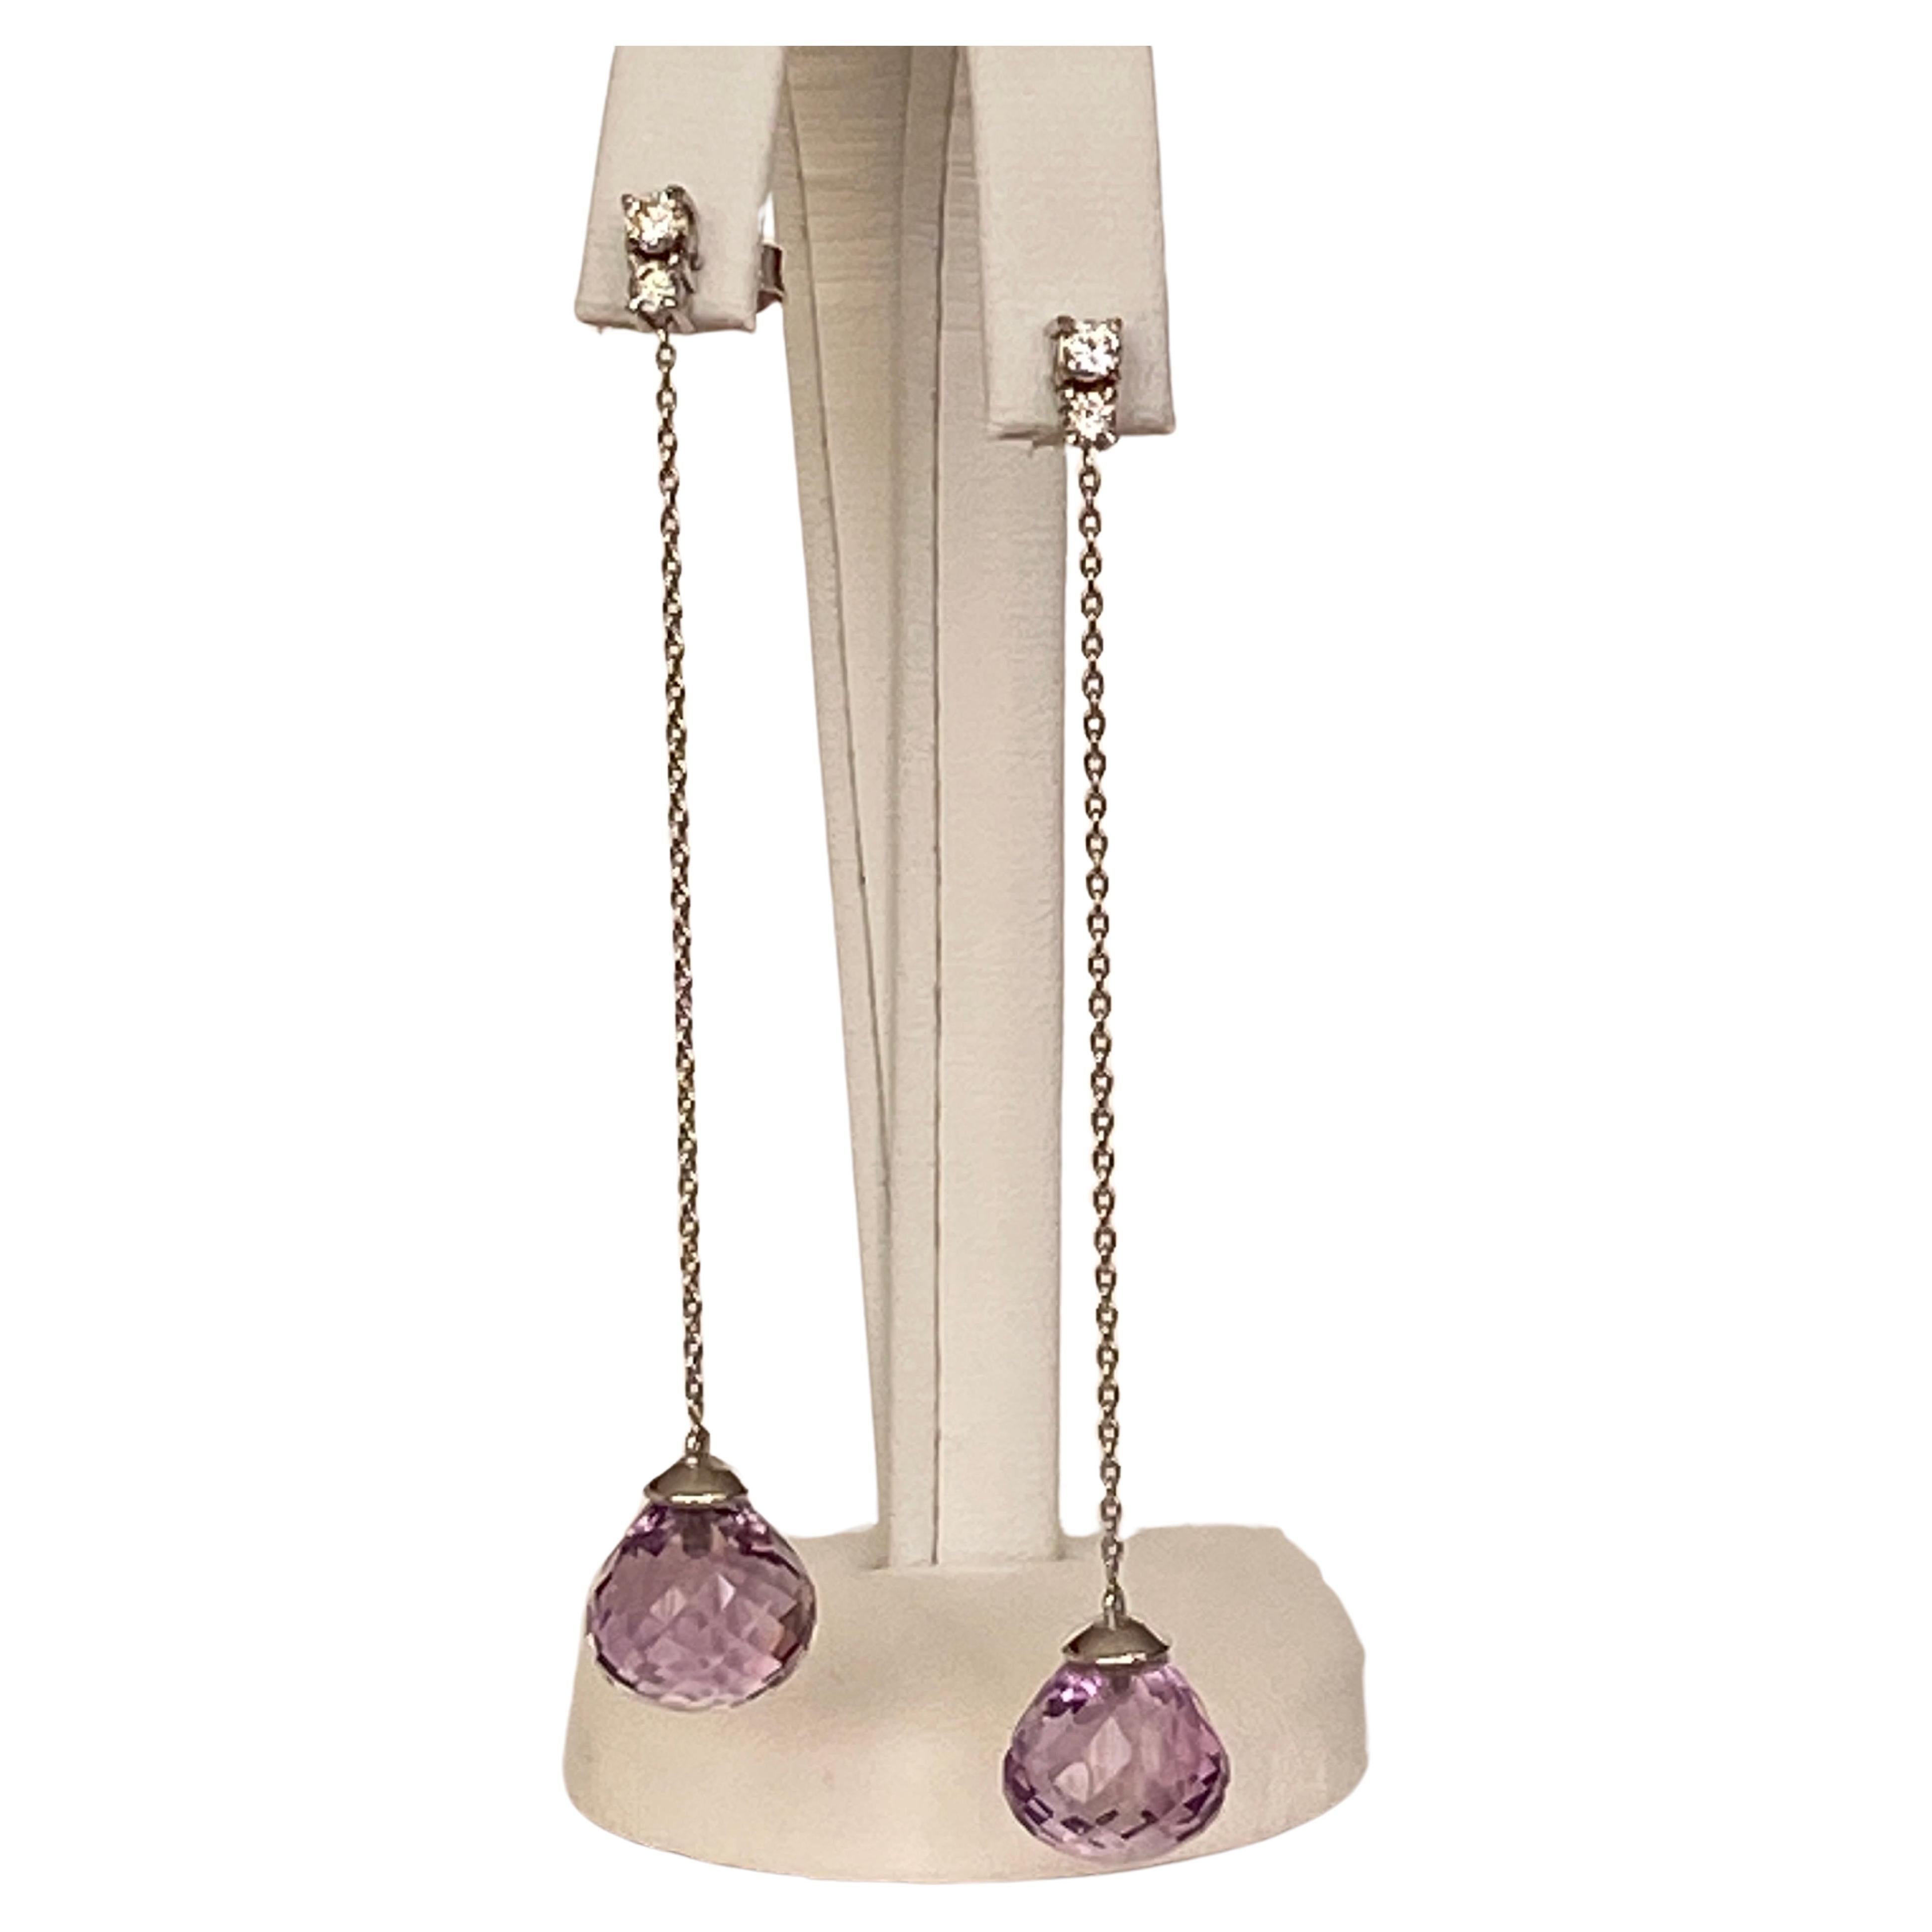 18kt White Gold Drop Earrings with Amethysts and diamonds